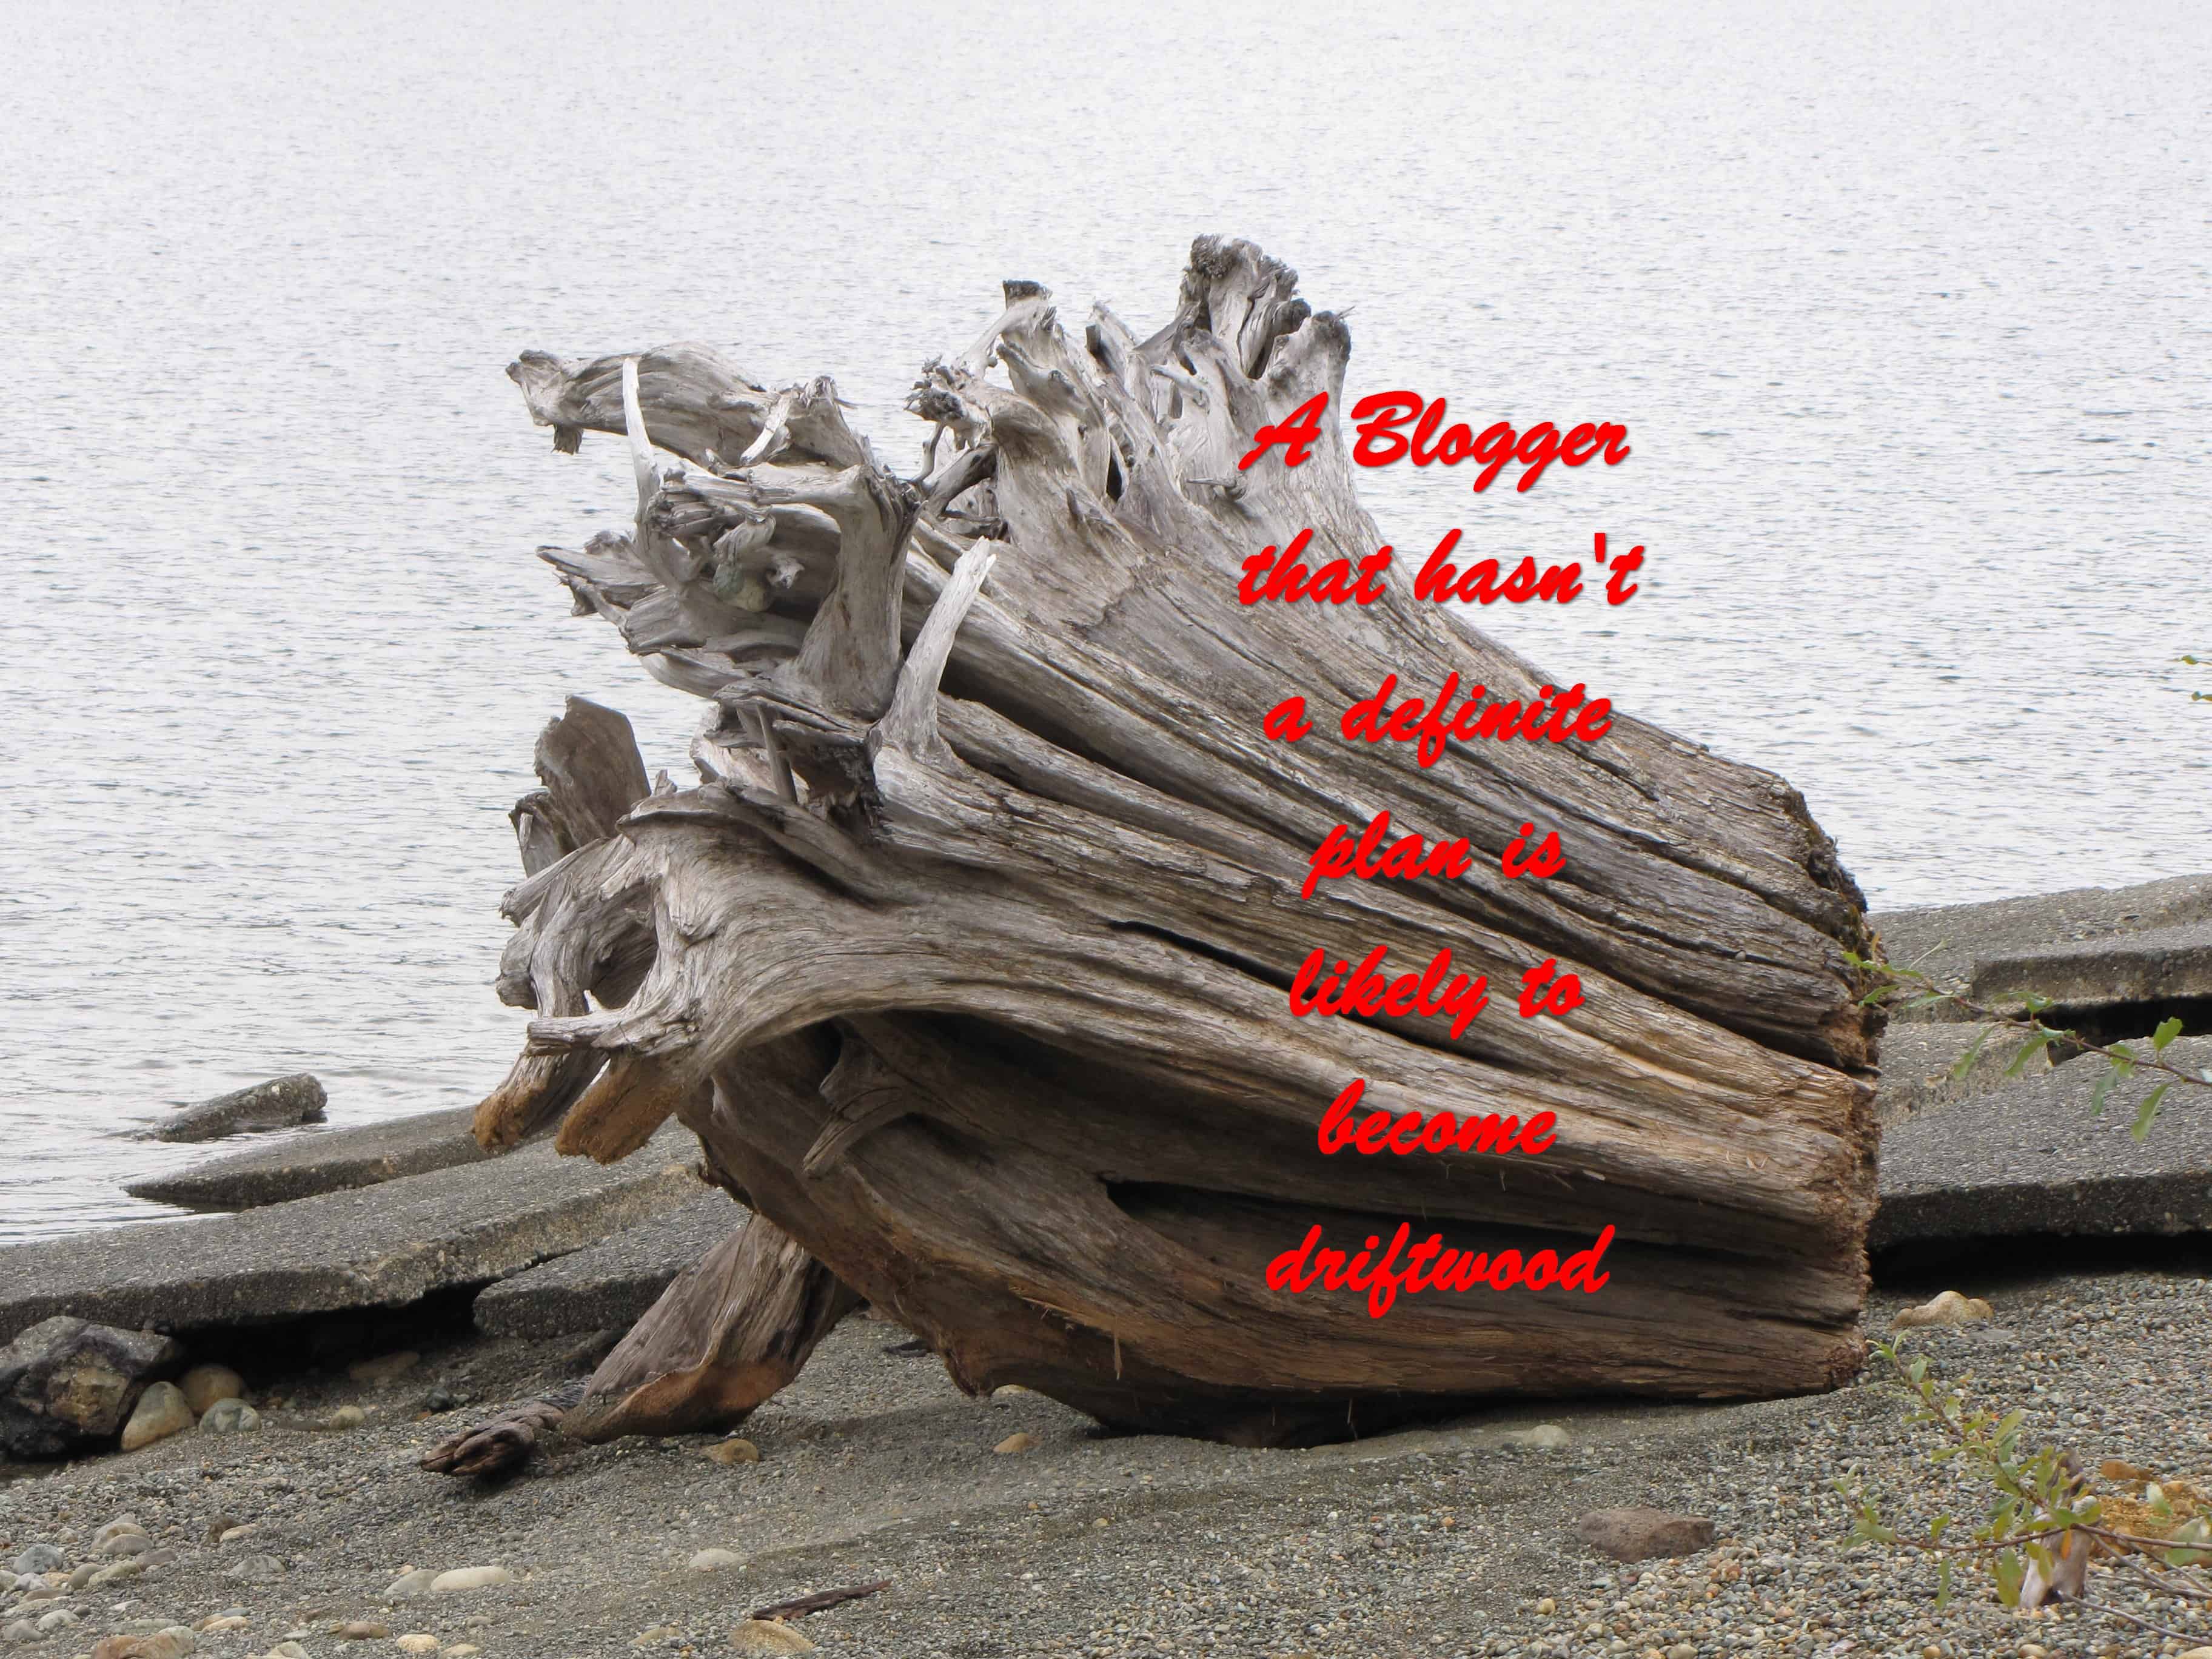 A BLOGGER that hasn't a definite plan is likely to become driftwood